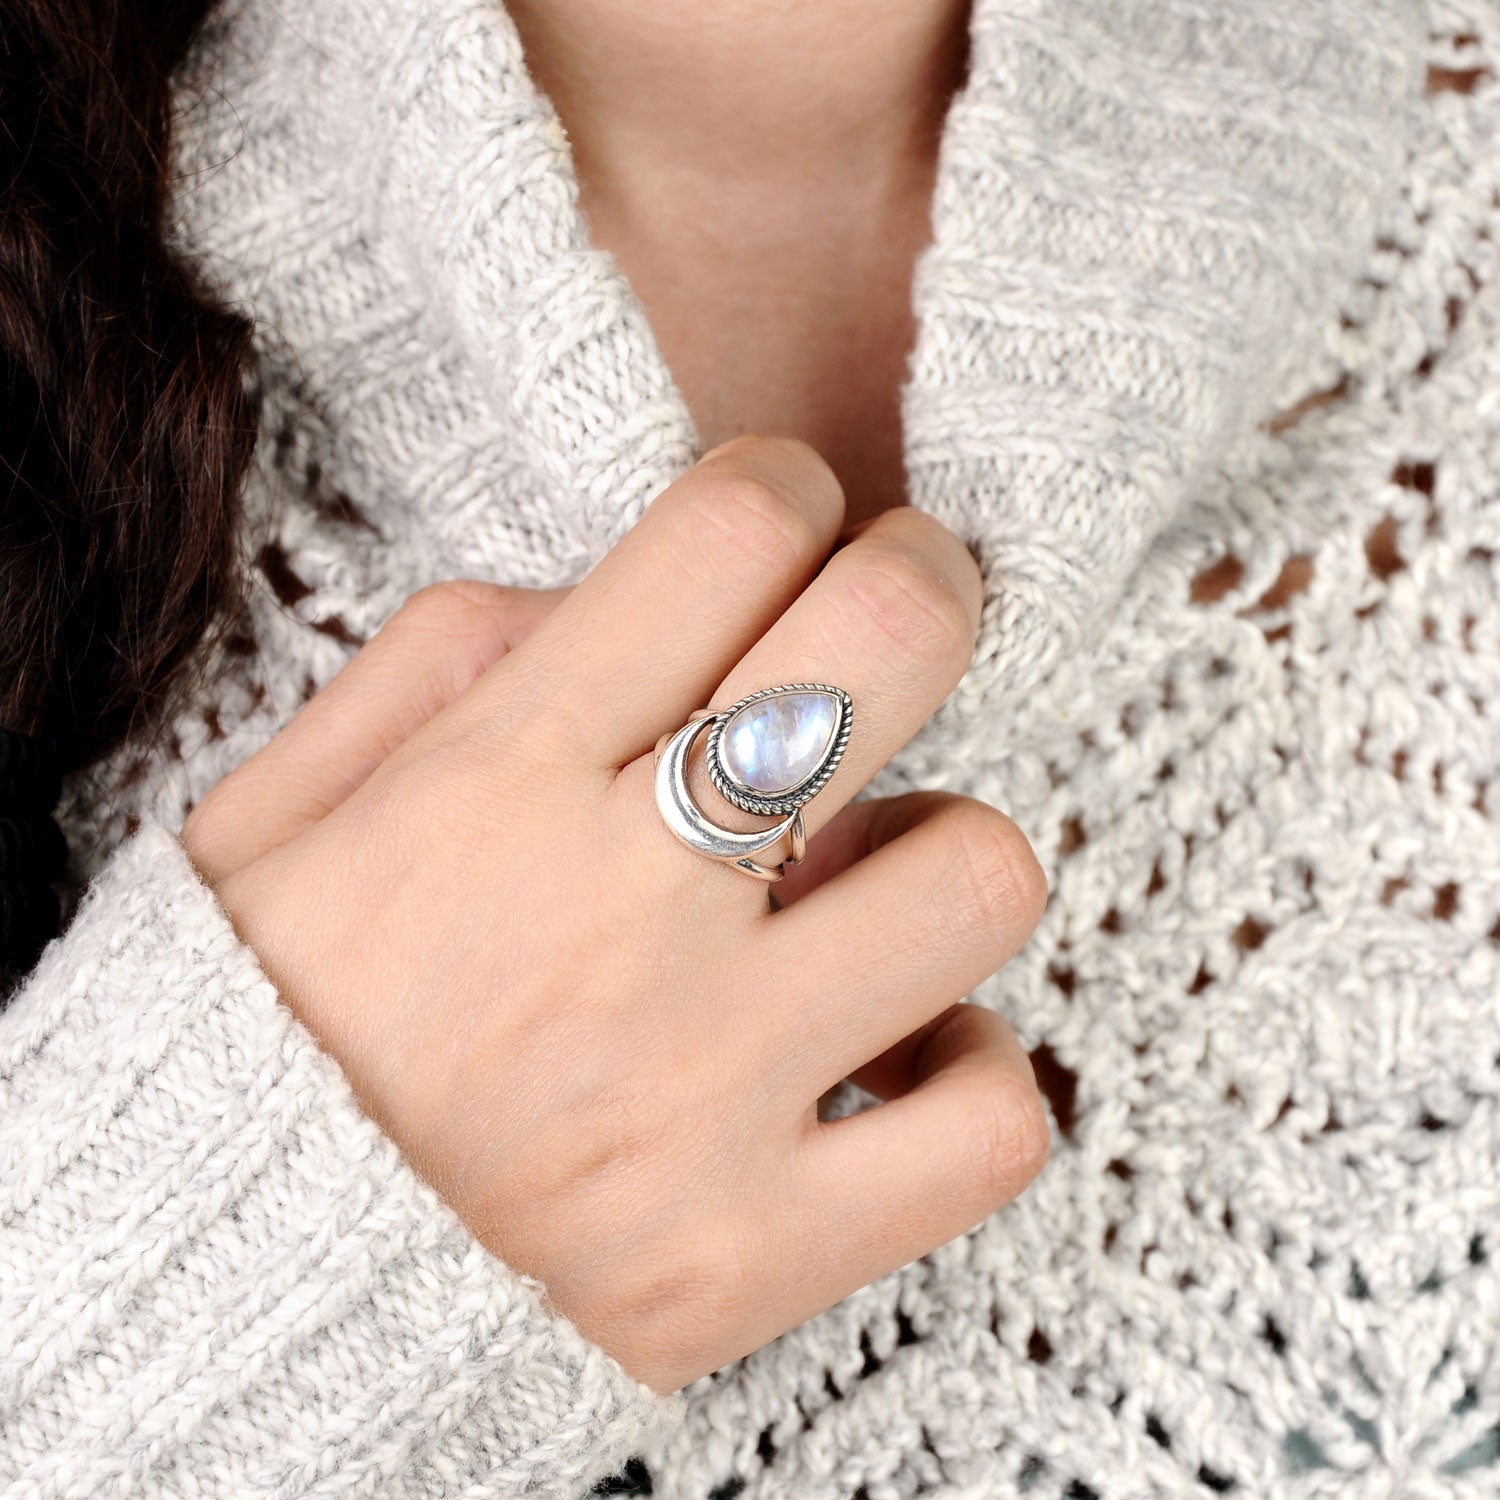 Sterling Silver Crescent Moon Ring